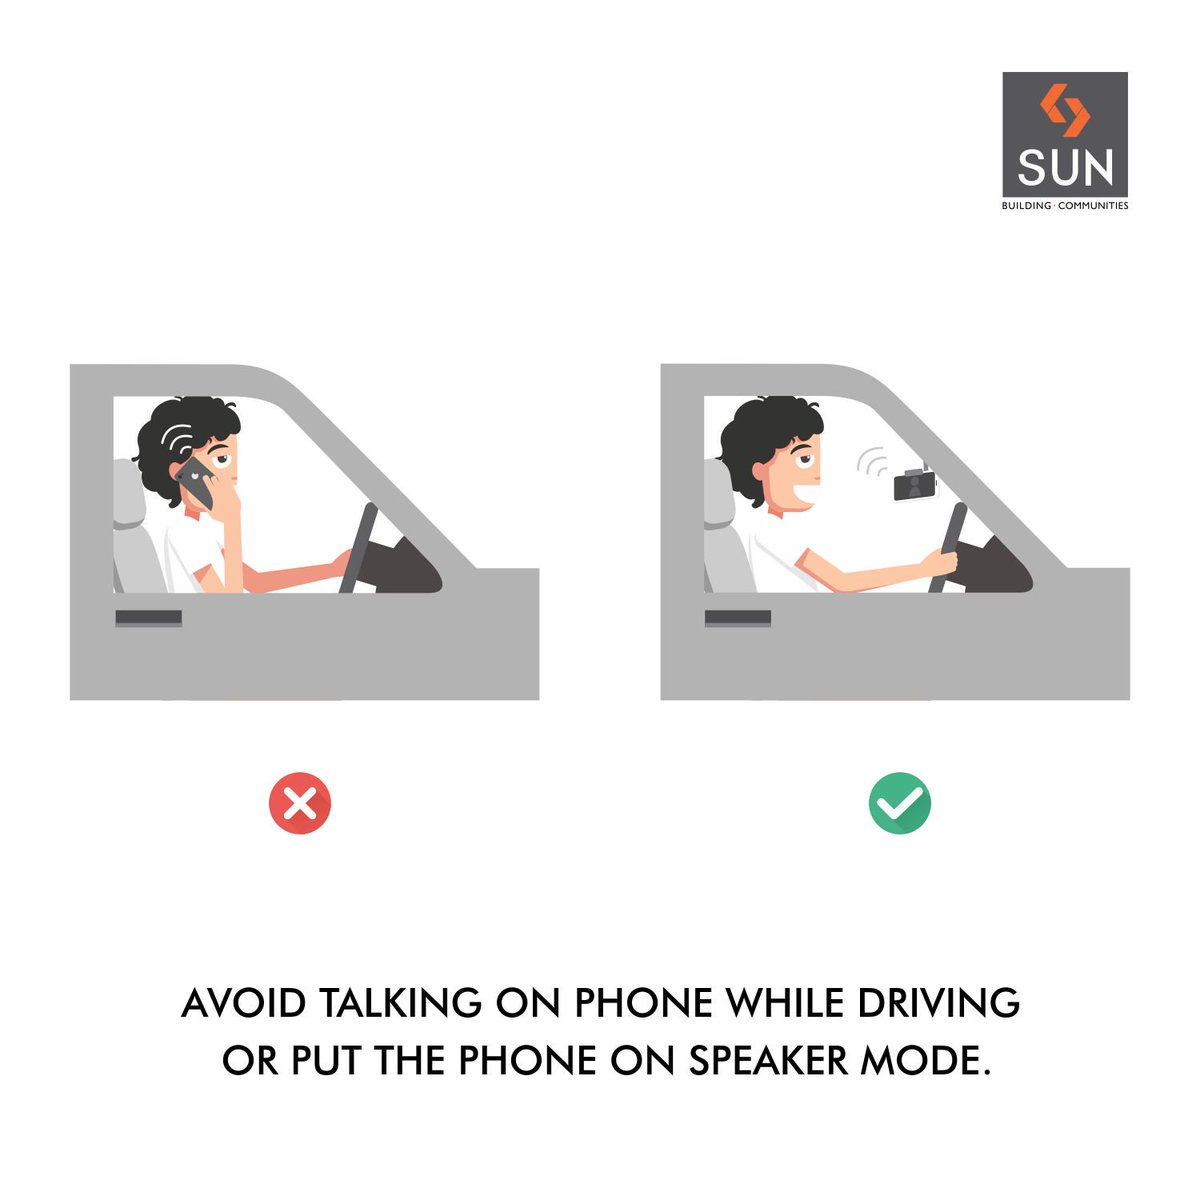 Put your life on safe-mode by avoiding talking on cellphone while driving. https://t.co/CPynbb9XrN